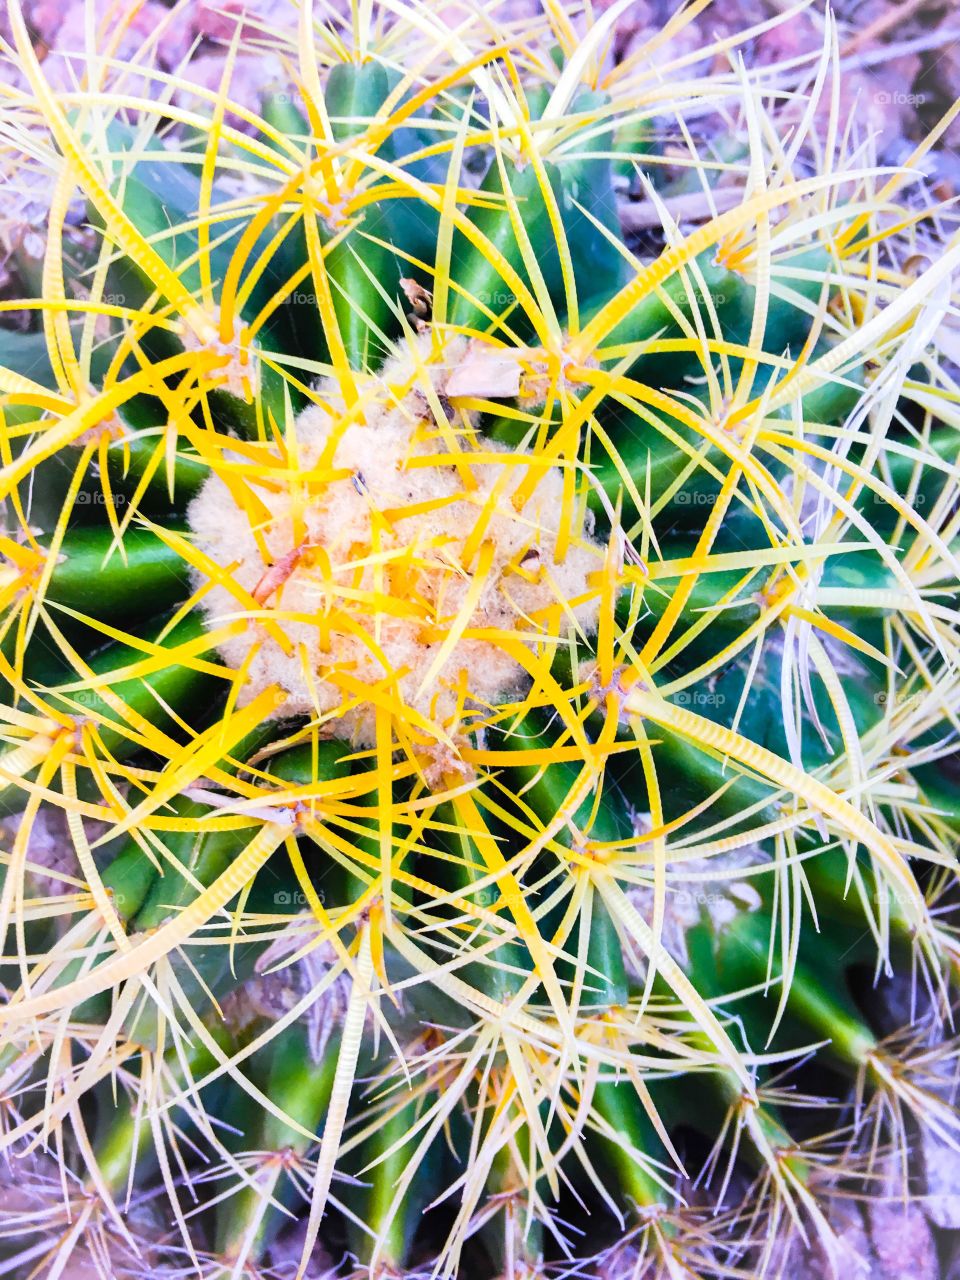 Extreme close-up of cactus plant